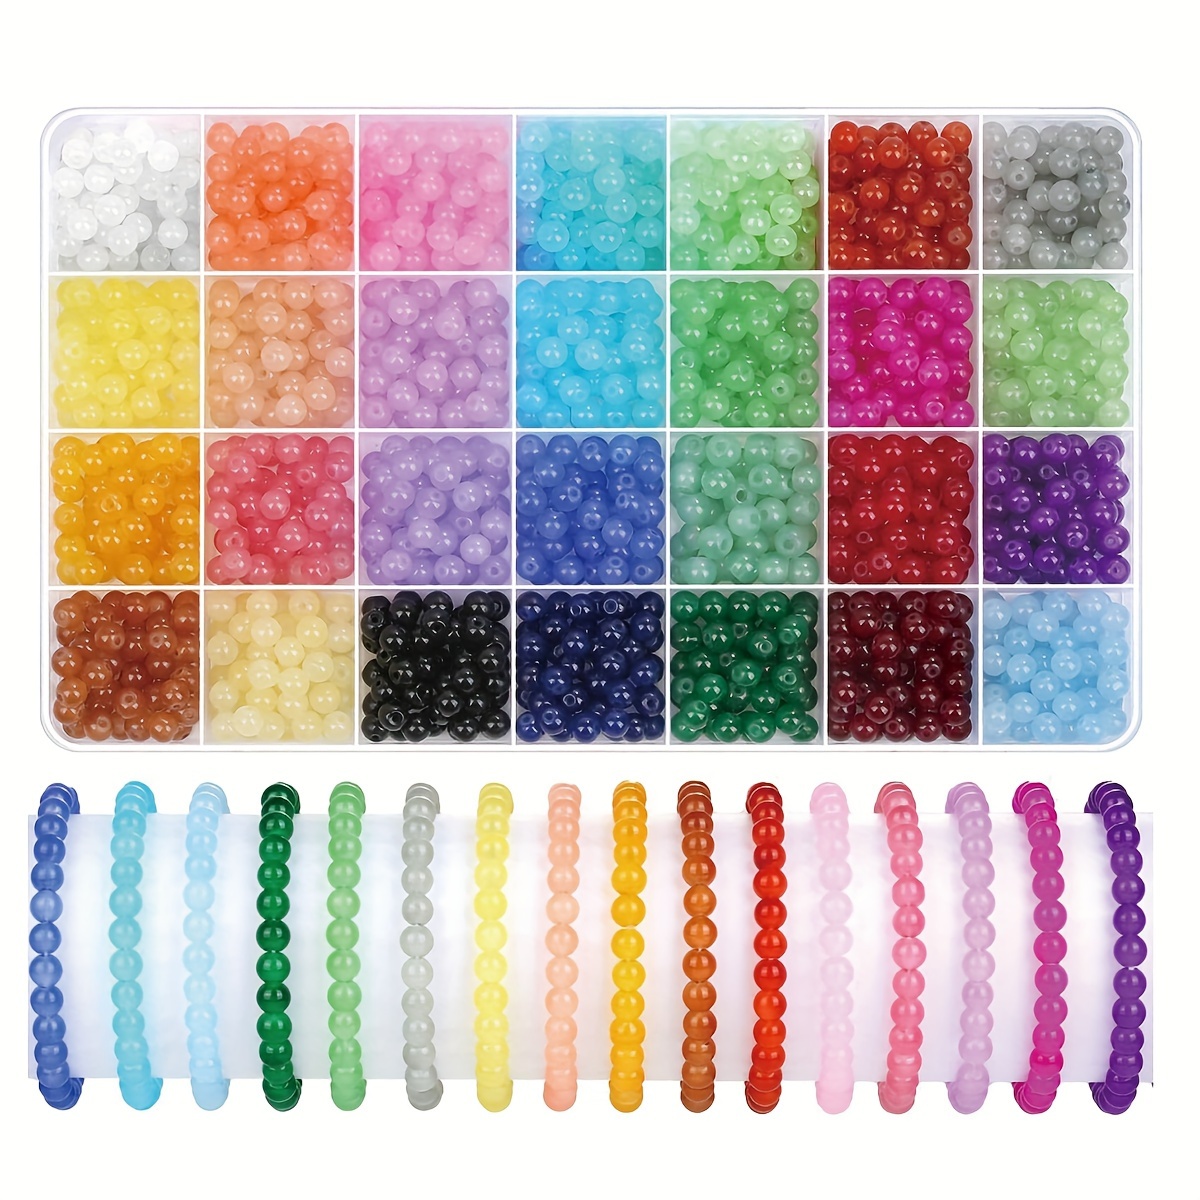 

1400pcs 6mm Rainbow Glass Jelly Beads Set, Elegant Diy Jewelry Making Kit, Crafts For Bracelets, Necklaces, Jewelry Accessories